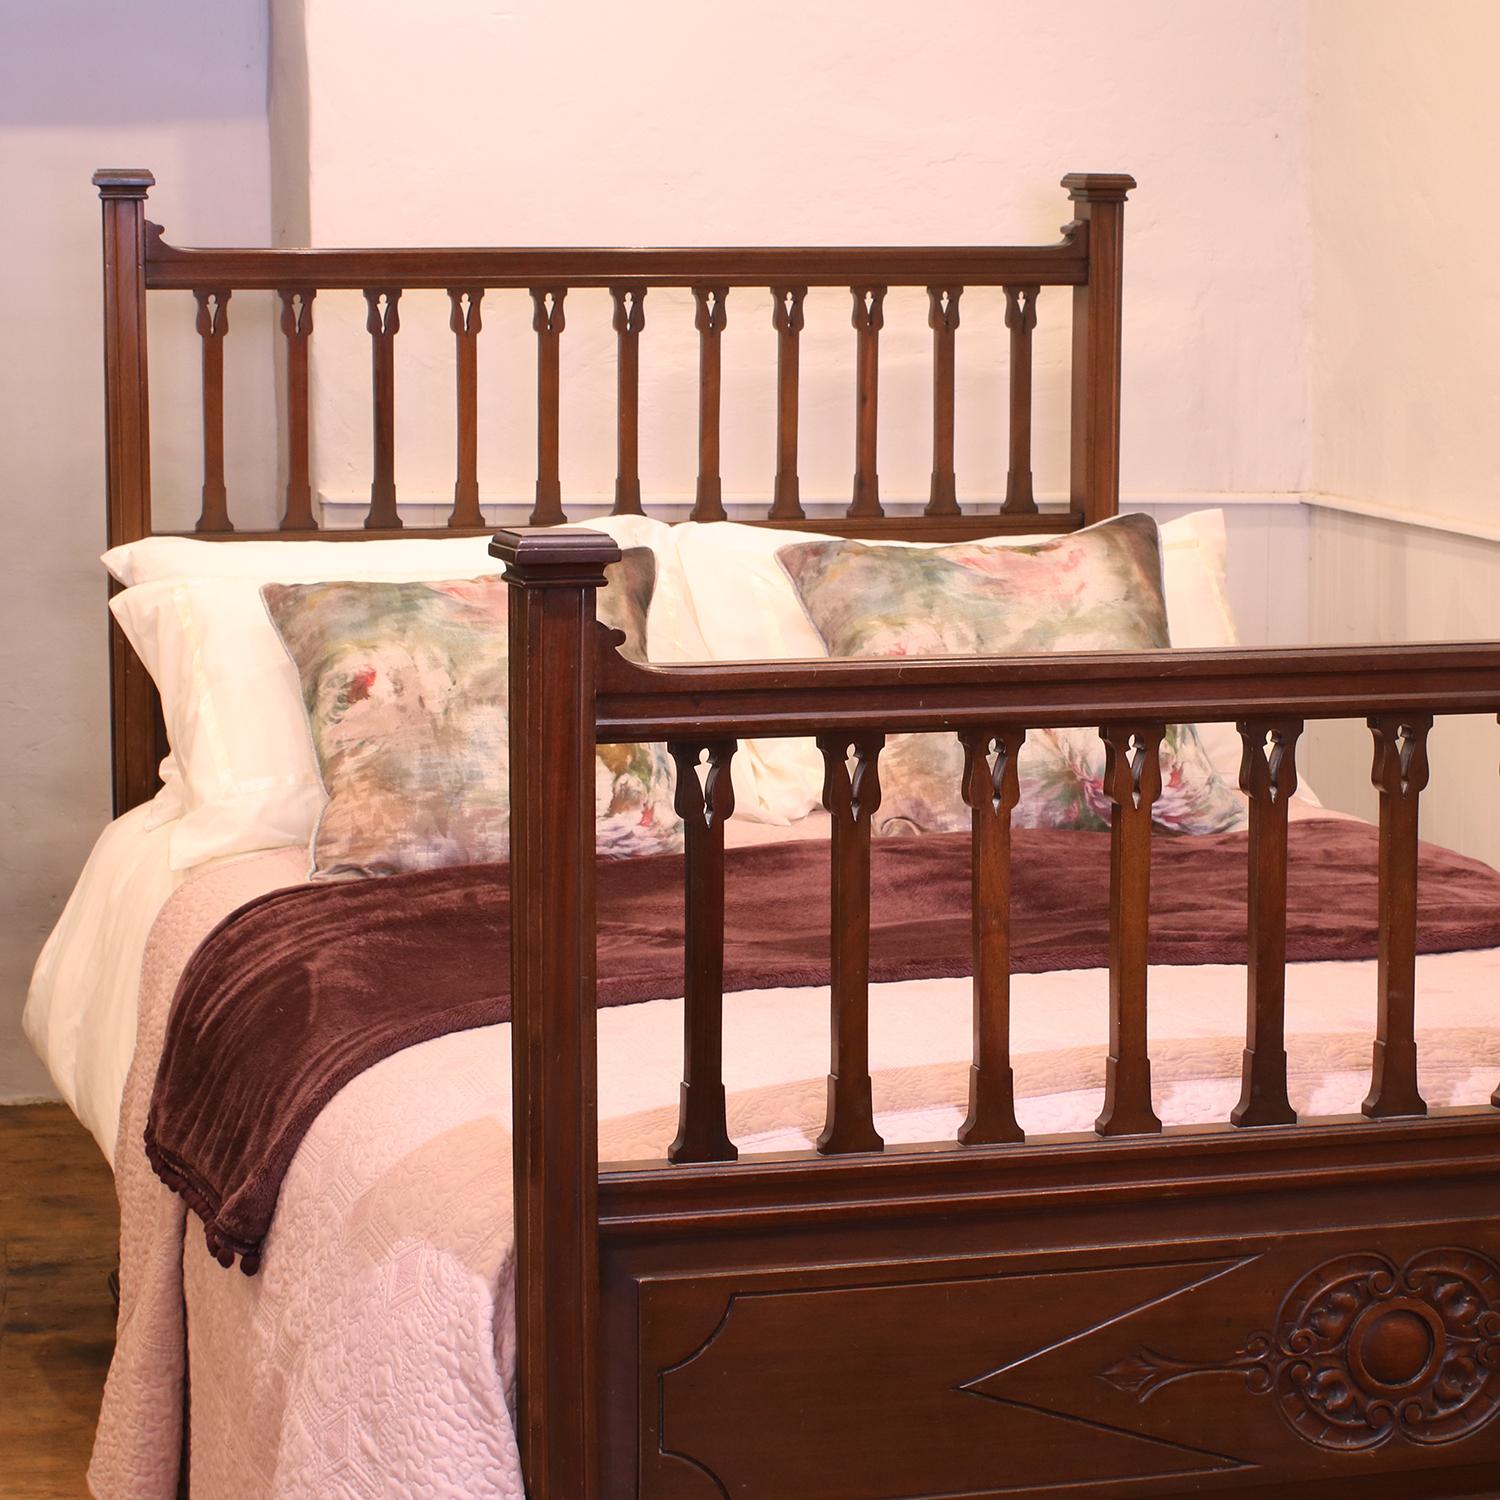 An Edwardian antique bed made from mahogany, with slatted head and food boards. 
This bed accepts a 4ft 6in wide (54 inches) base and mattress. 
The price is for the bed frame with a firm bed base. 
The mattress, bedding and linen are extra.